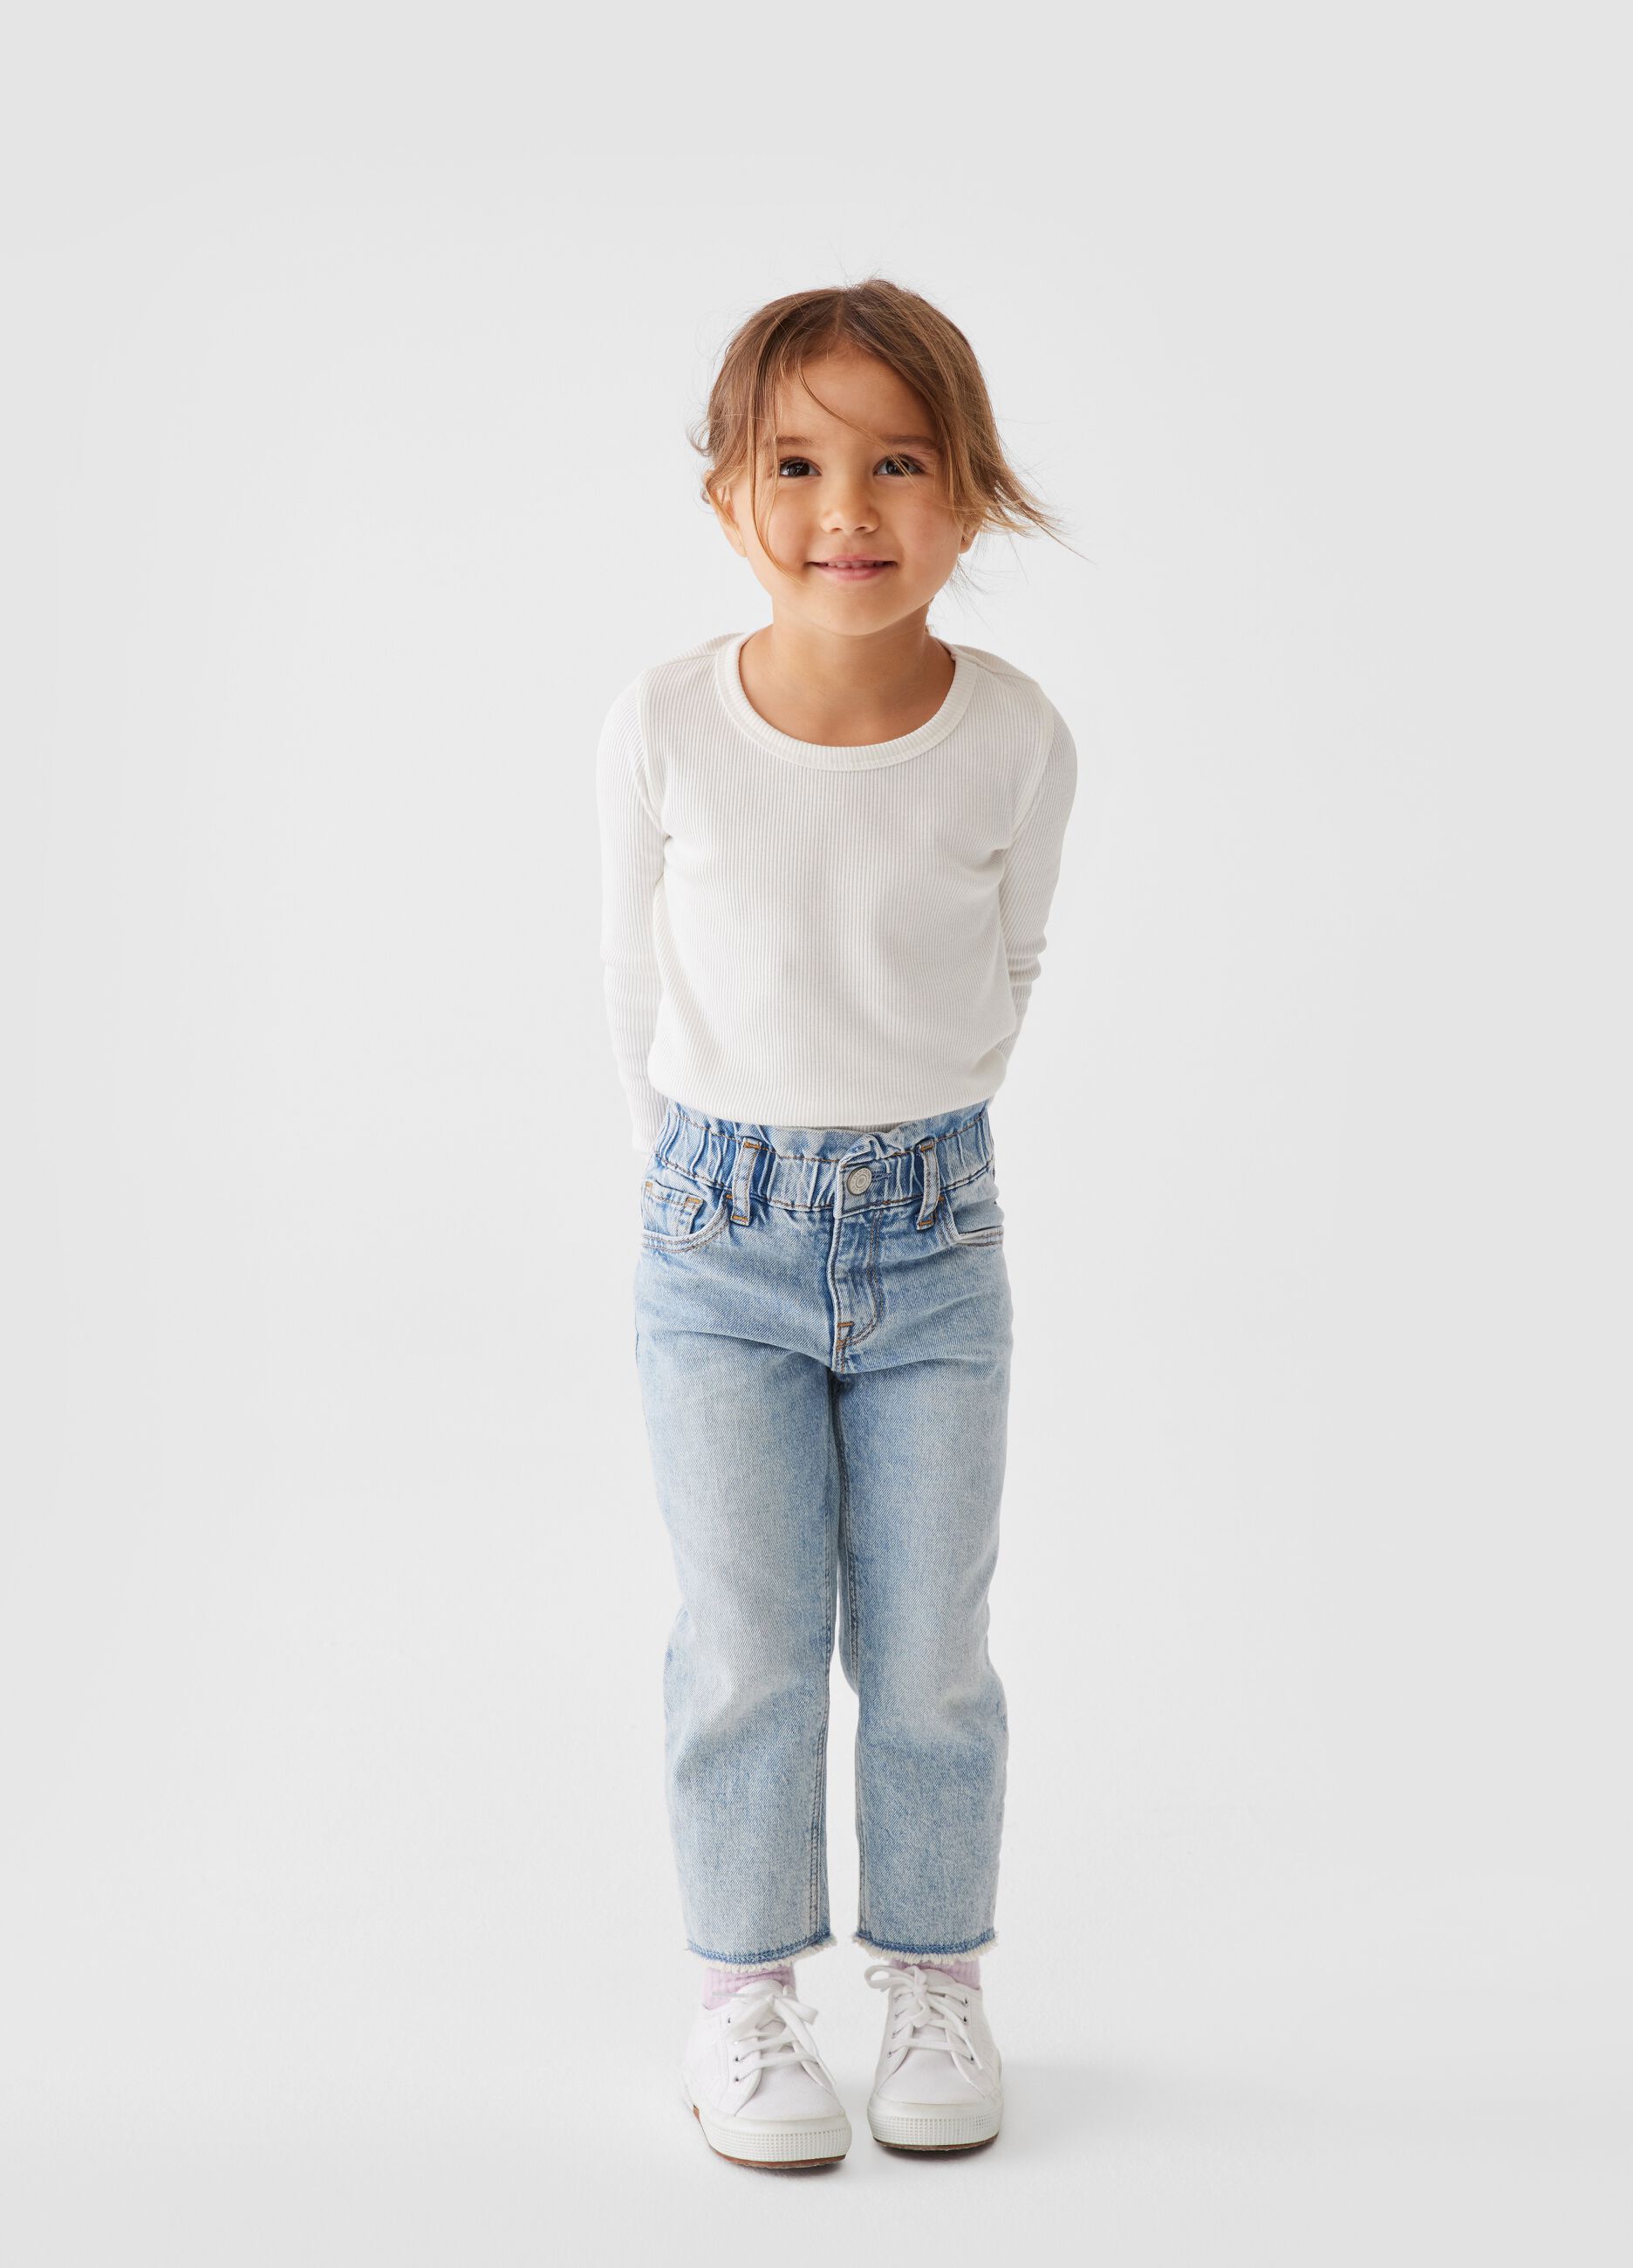 Mum-fit jeans with ruffles